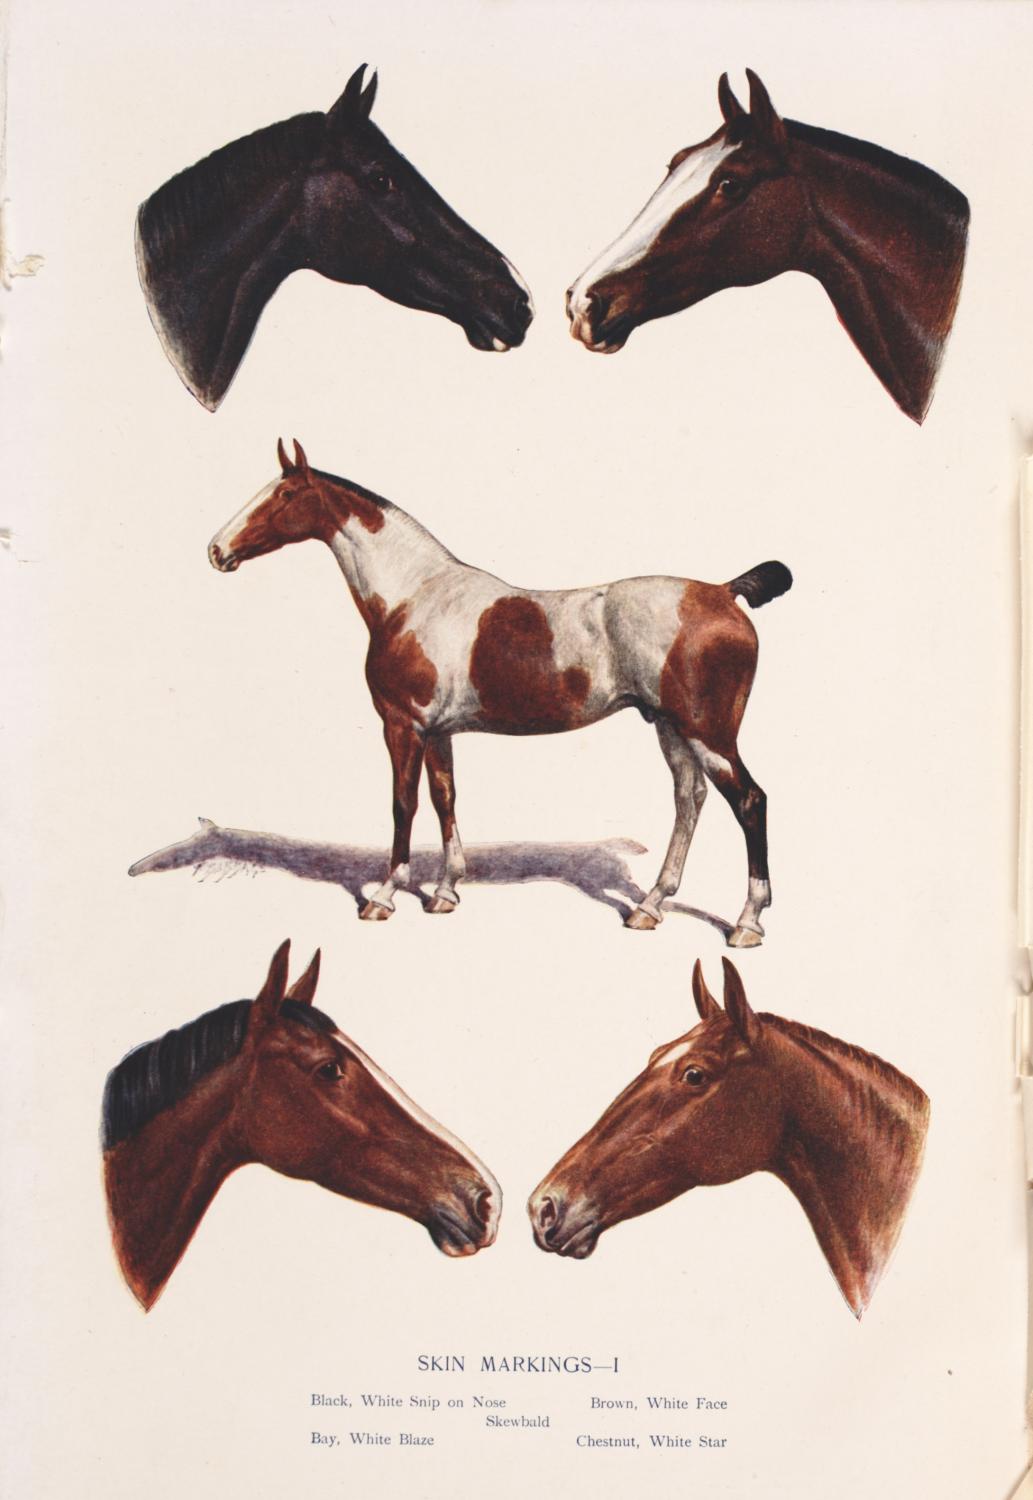 Skin markings, from The horse, its treatment in health and disease with a complete guide to breeding, training and management, by J. Wortley Axe (London, 1906)